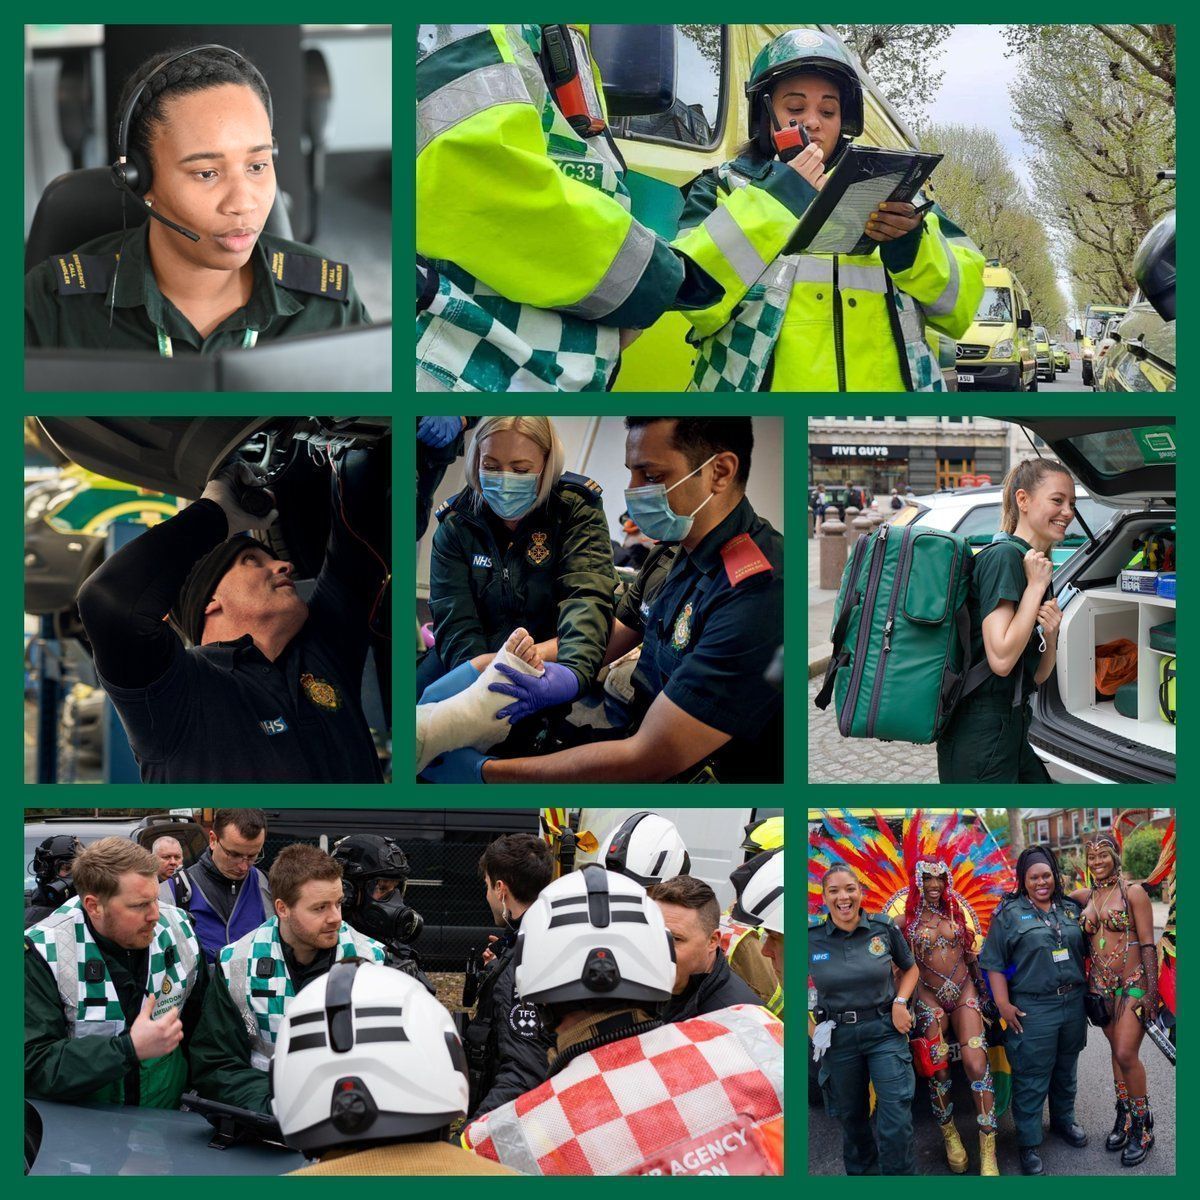 New month, new job? Find a #TeamLAS career that works for you. We’re currently hiring ⬇️ ✅ Qualified Paramedics ✅ Pharmacy Technicians ✅ Training & Compliance Officers buff.ly/2pBIxkt #AmbulanceCareers #LondonJobs